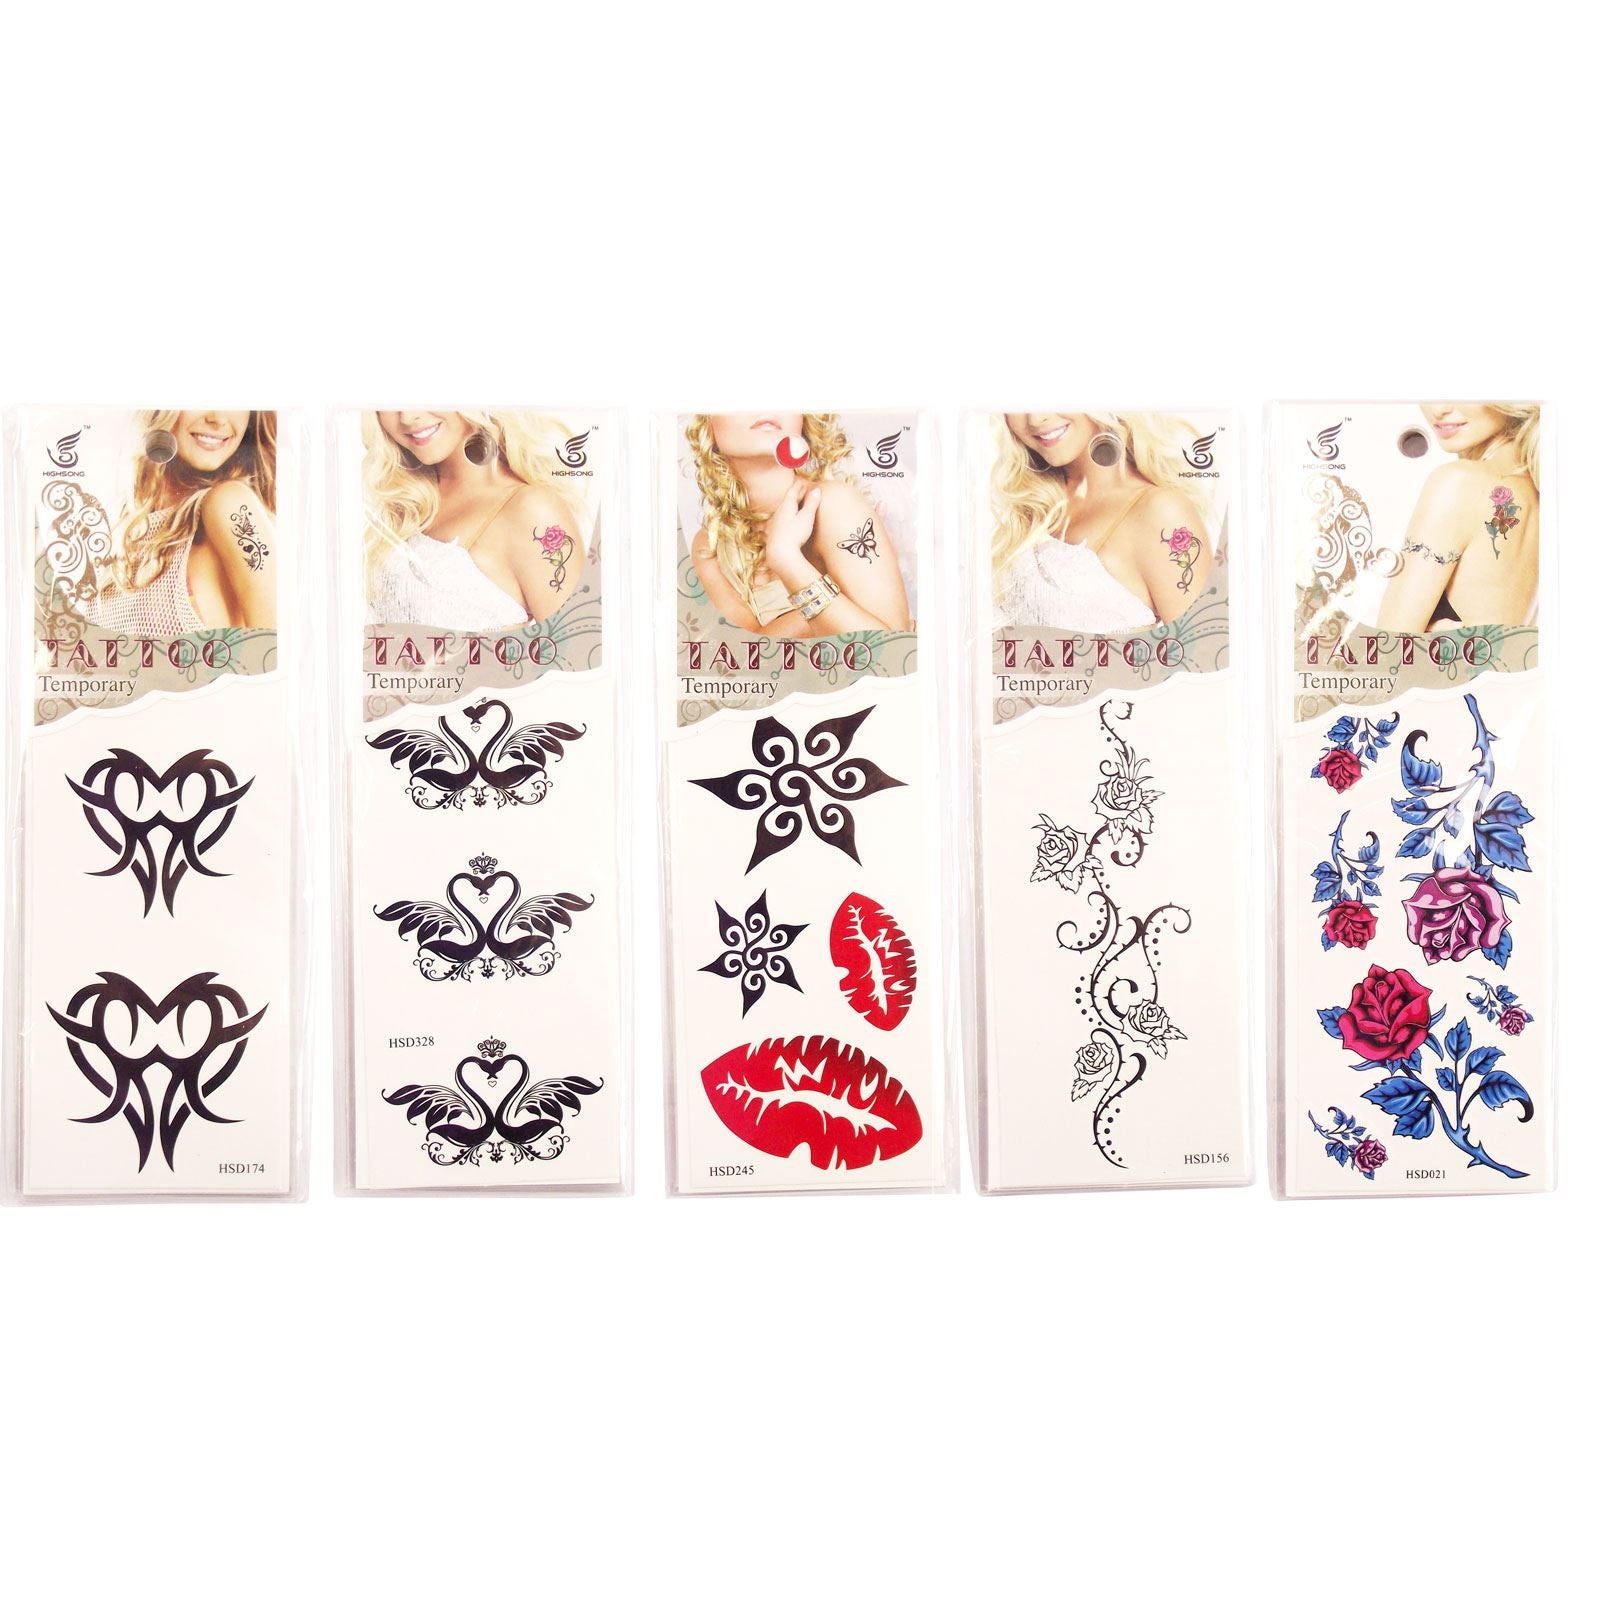 Wholesale 50x Packs of Assorted Transfer Tattoos